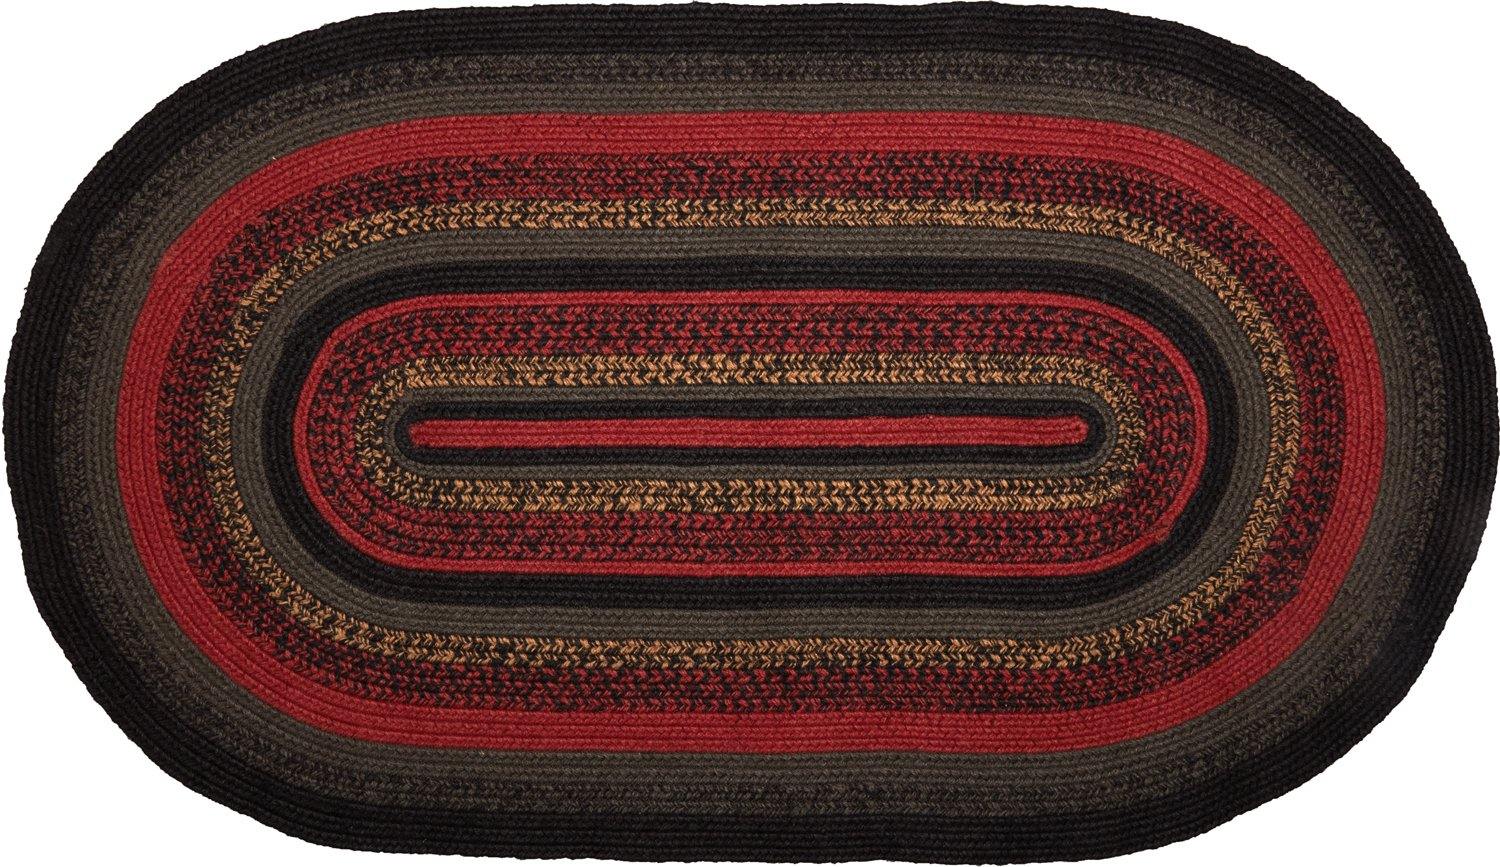 Cumberland Jute Braided Rug Oval 27"x48" with Rug Pad VHC Brands - The Fox Decor